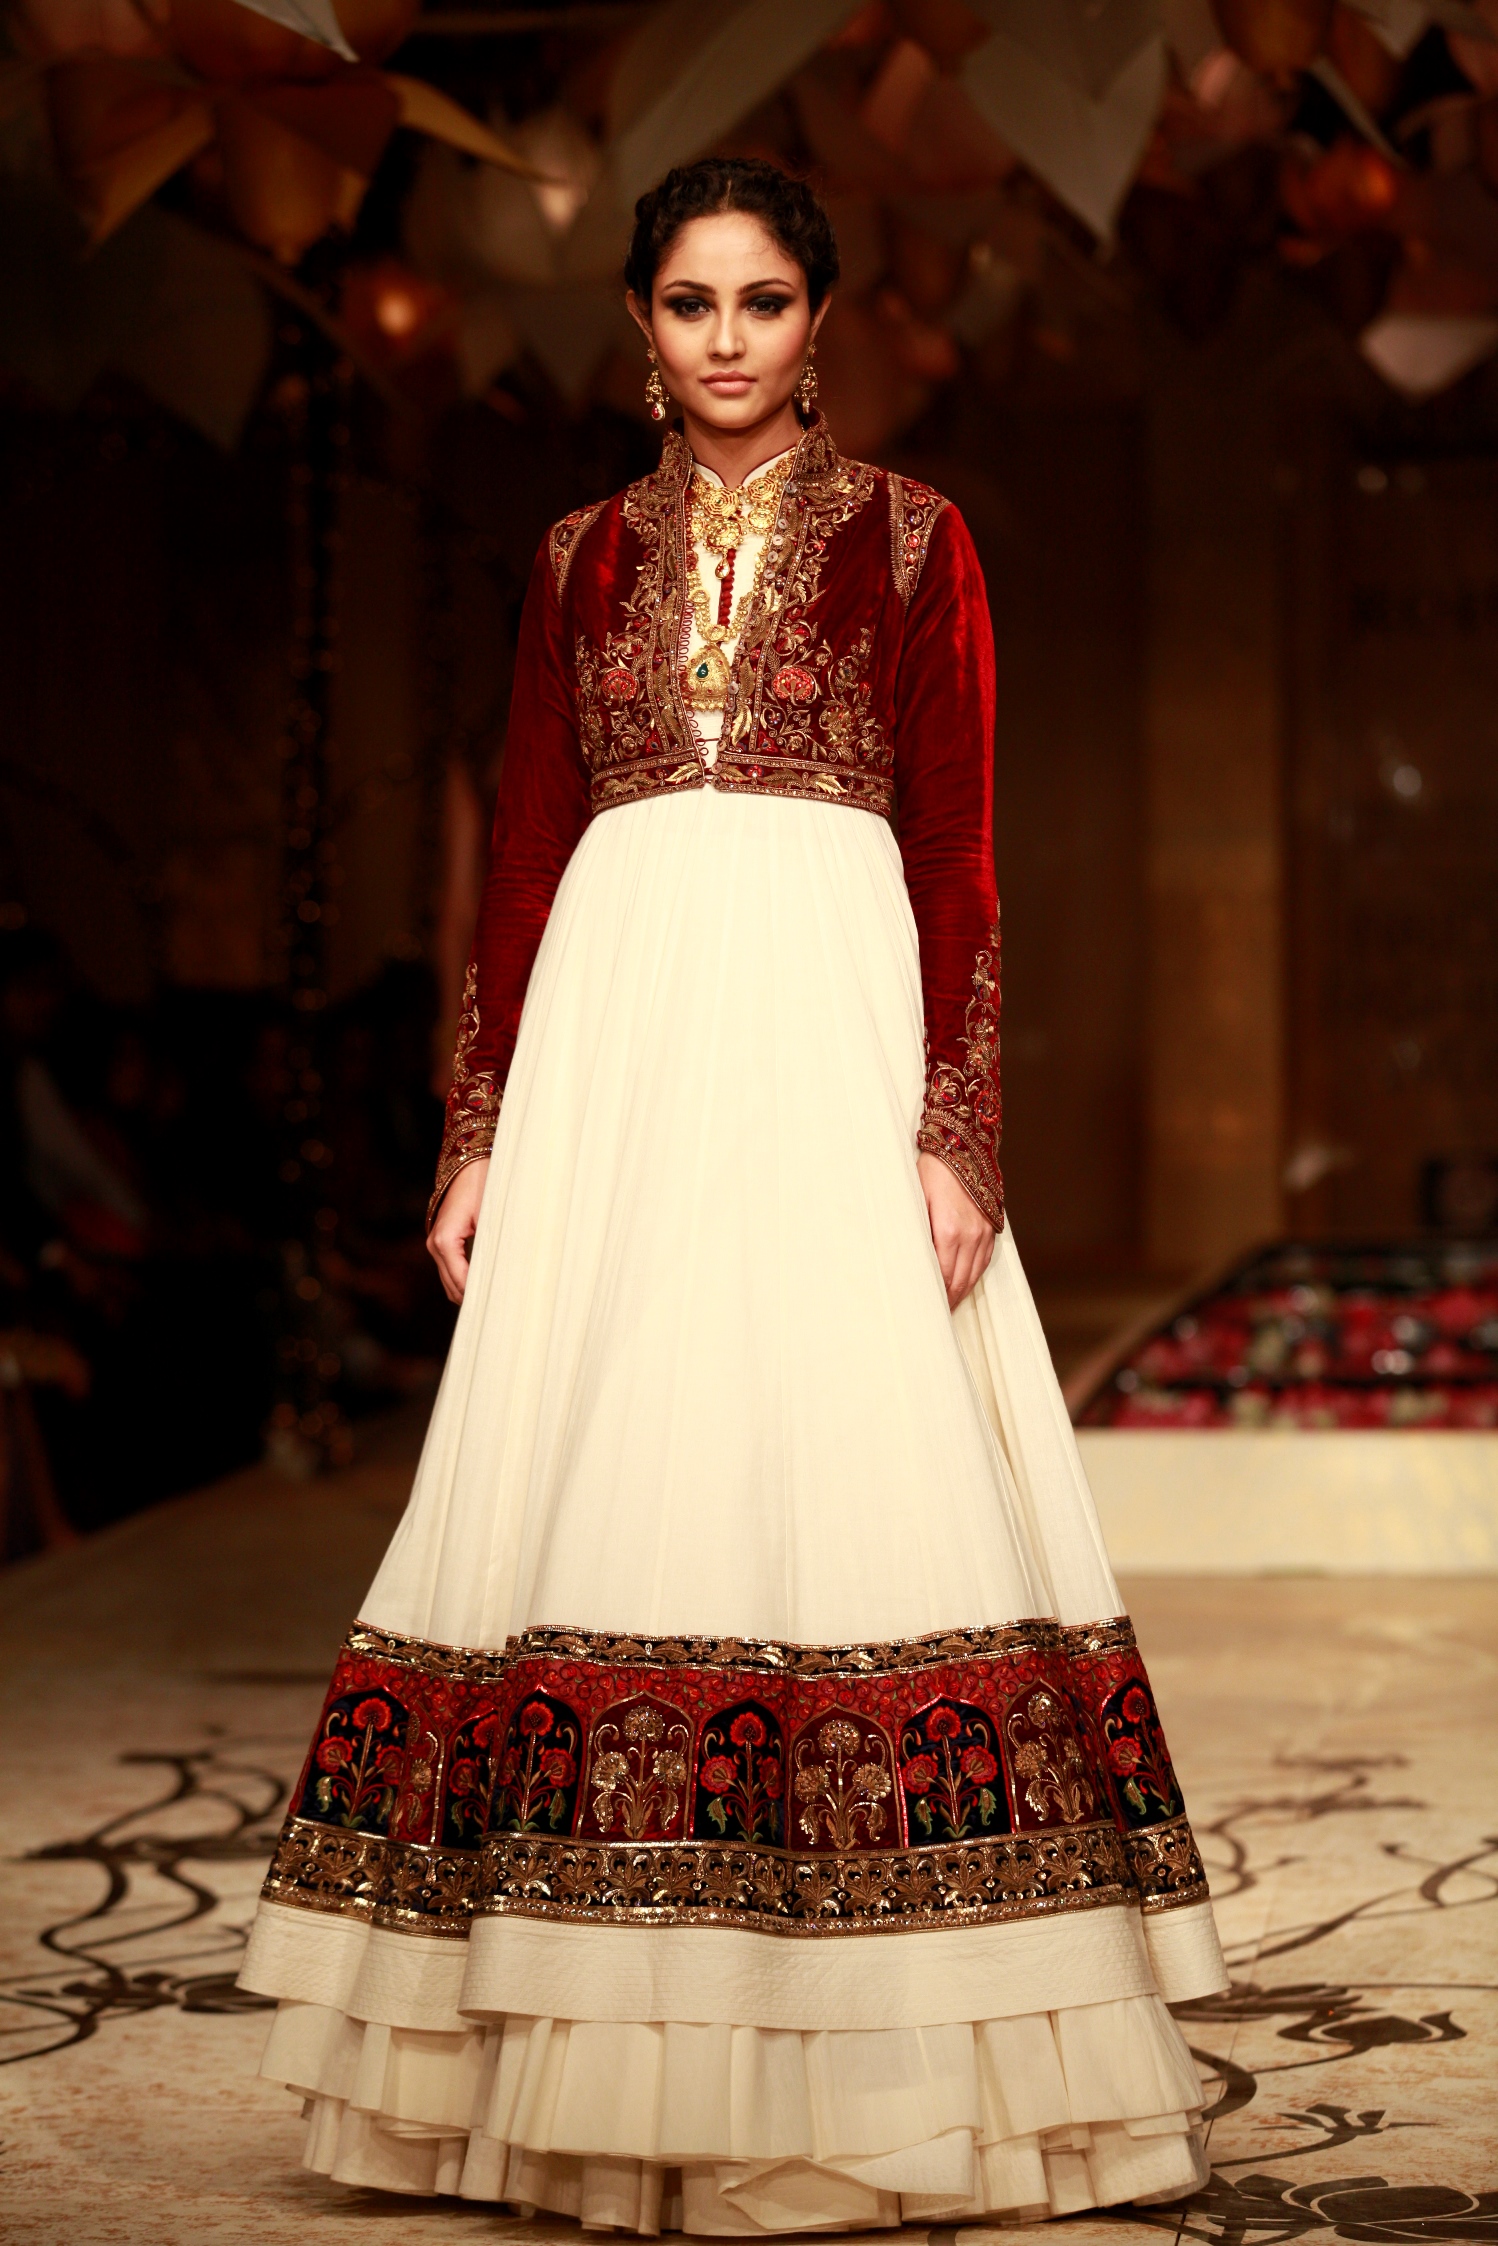 Seen at Aamby Valley India Bridal Fashion Week - Model walking for Rohit Bal (6)